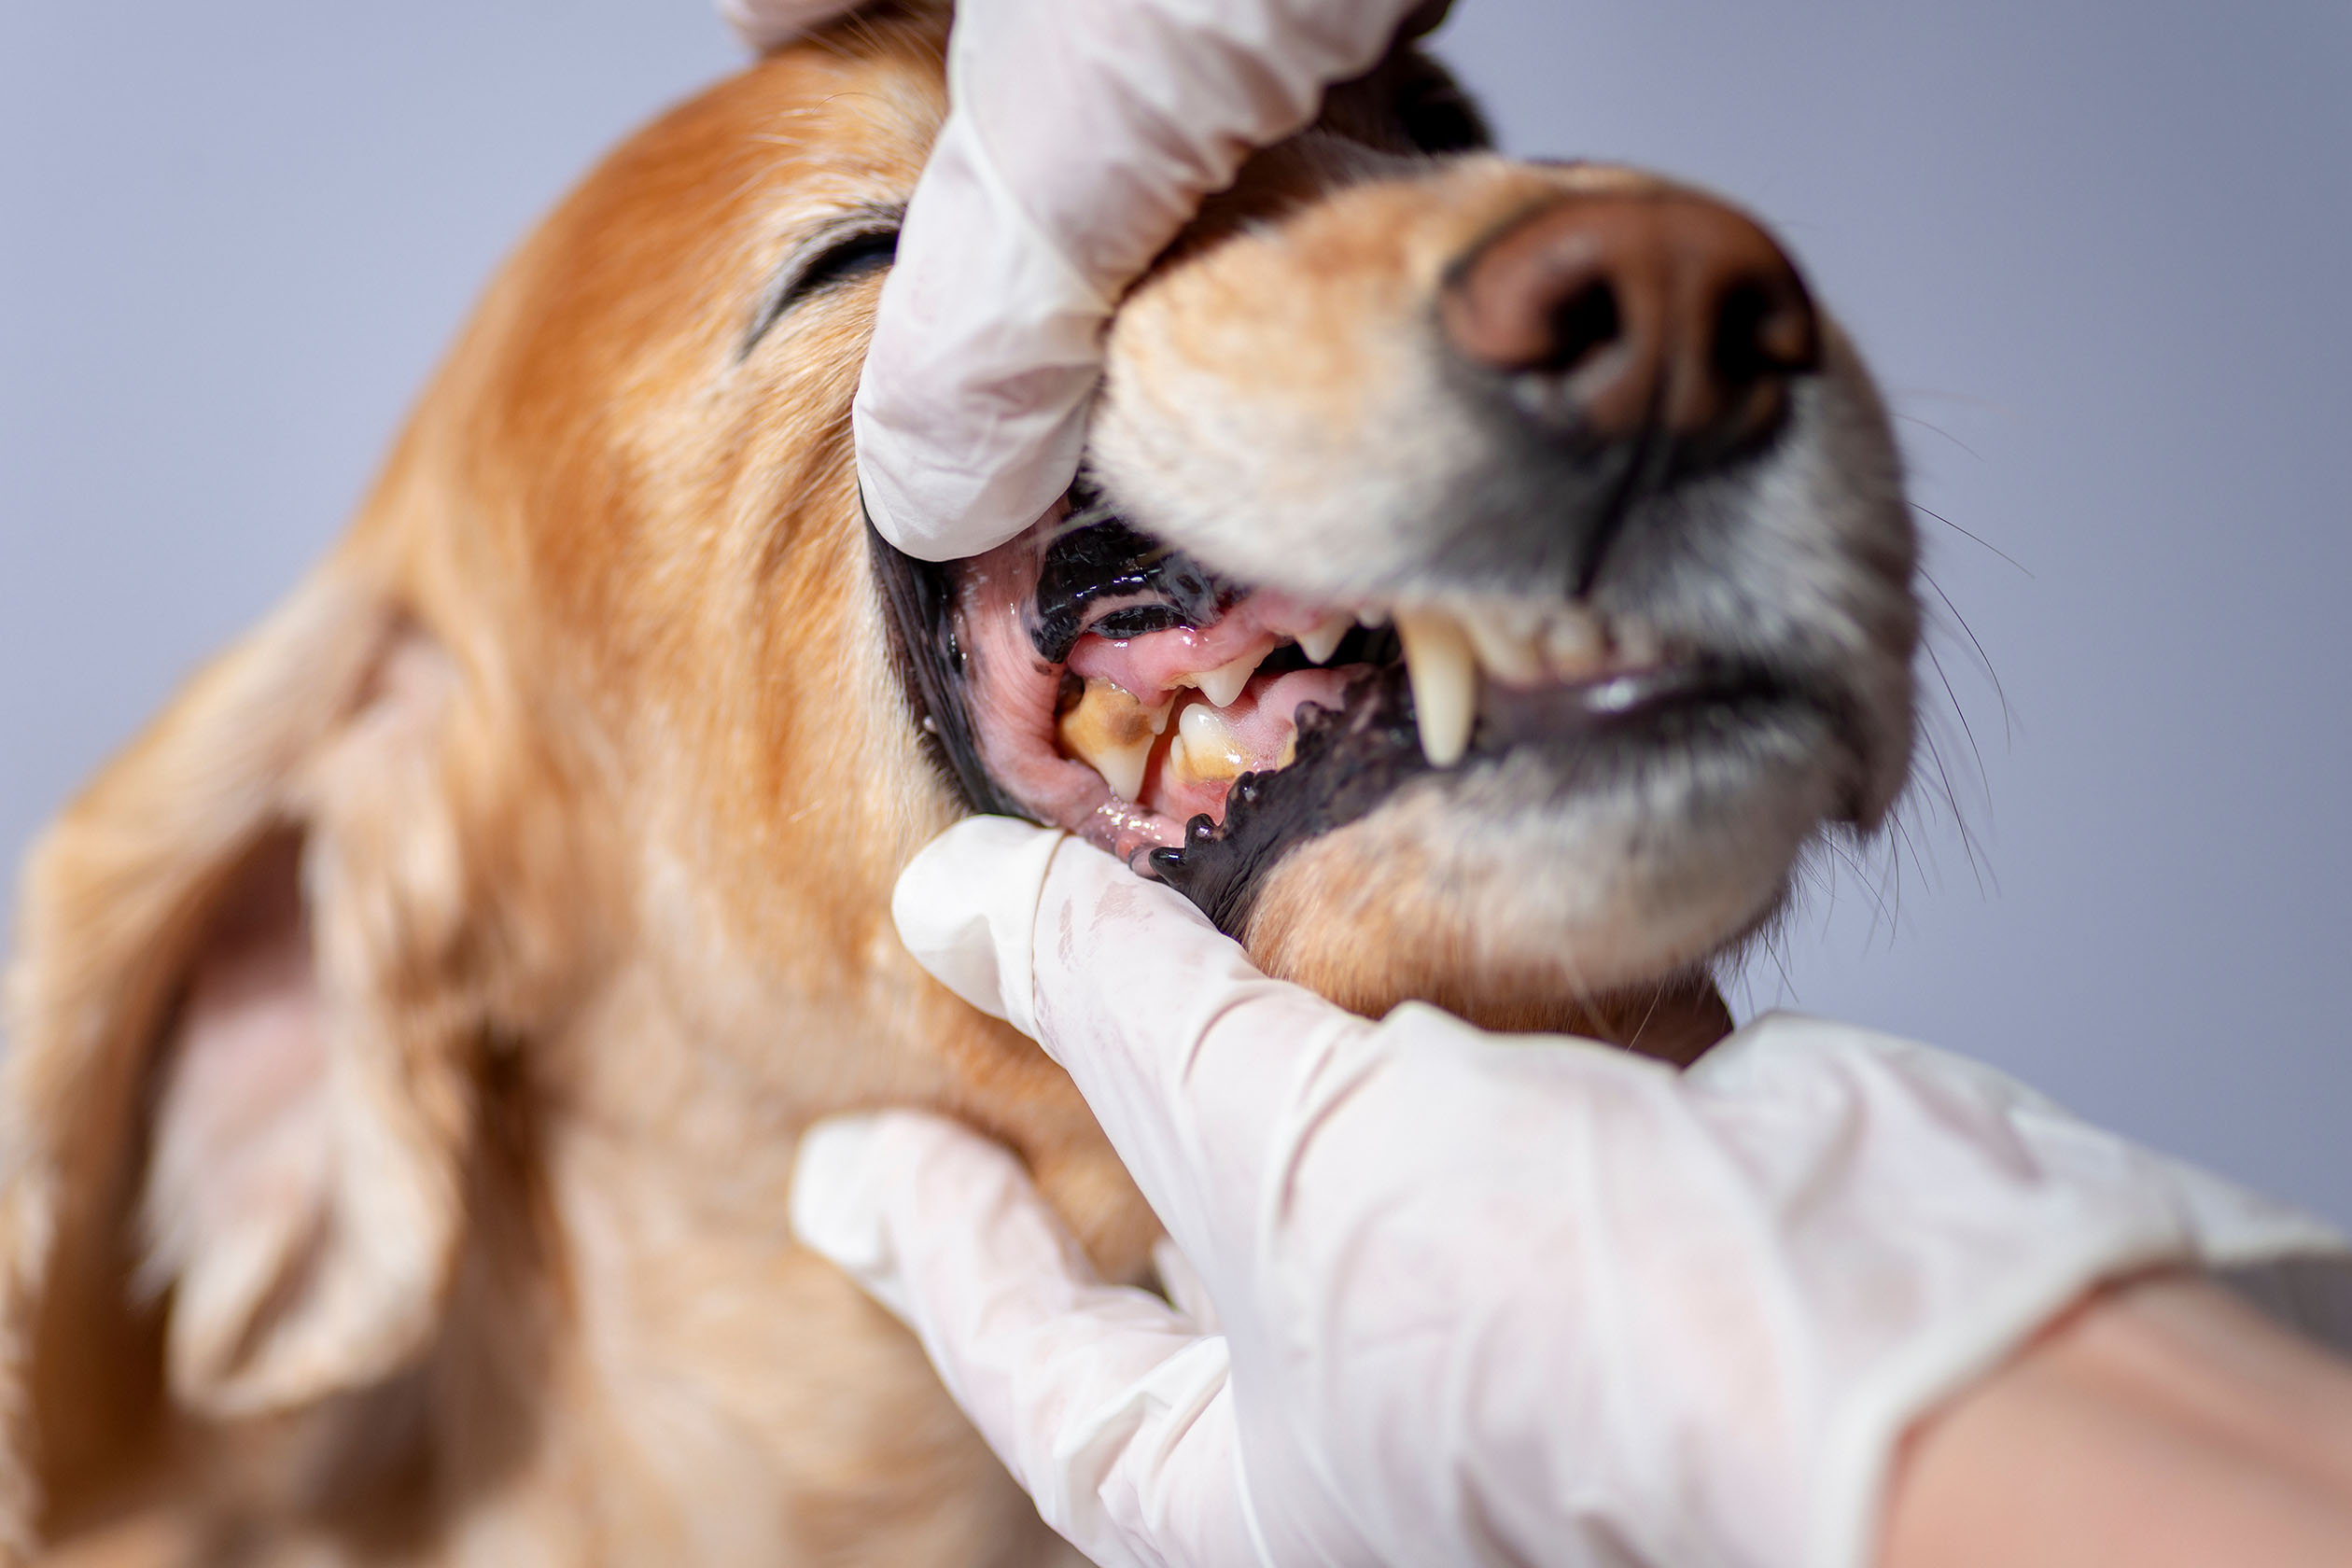 do dogs lose their puppy teeth